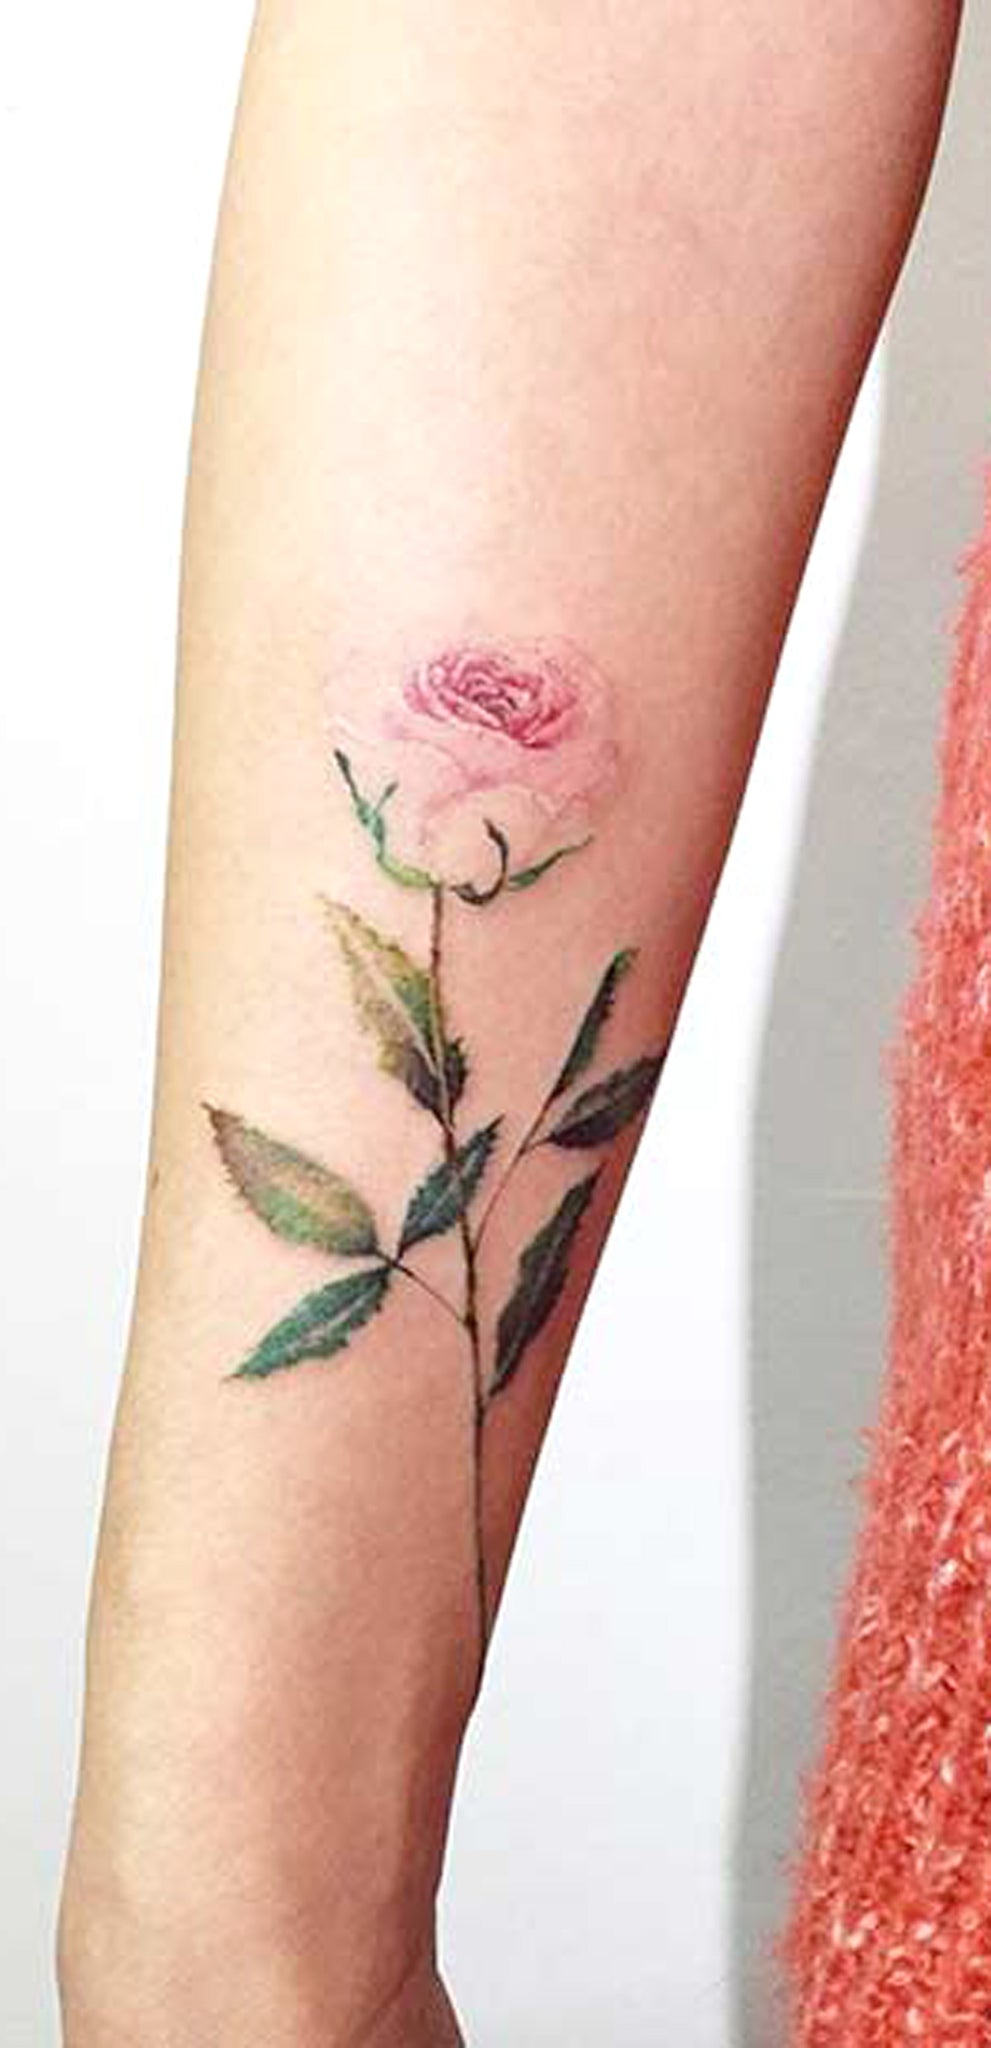 Small Delicate Single Rose Forearm Tattoo Ideas for Women - Vintage Traditional Arm Tat - www.MyBodiArt.com